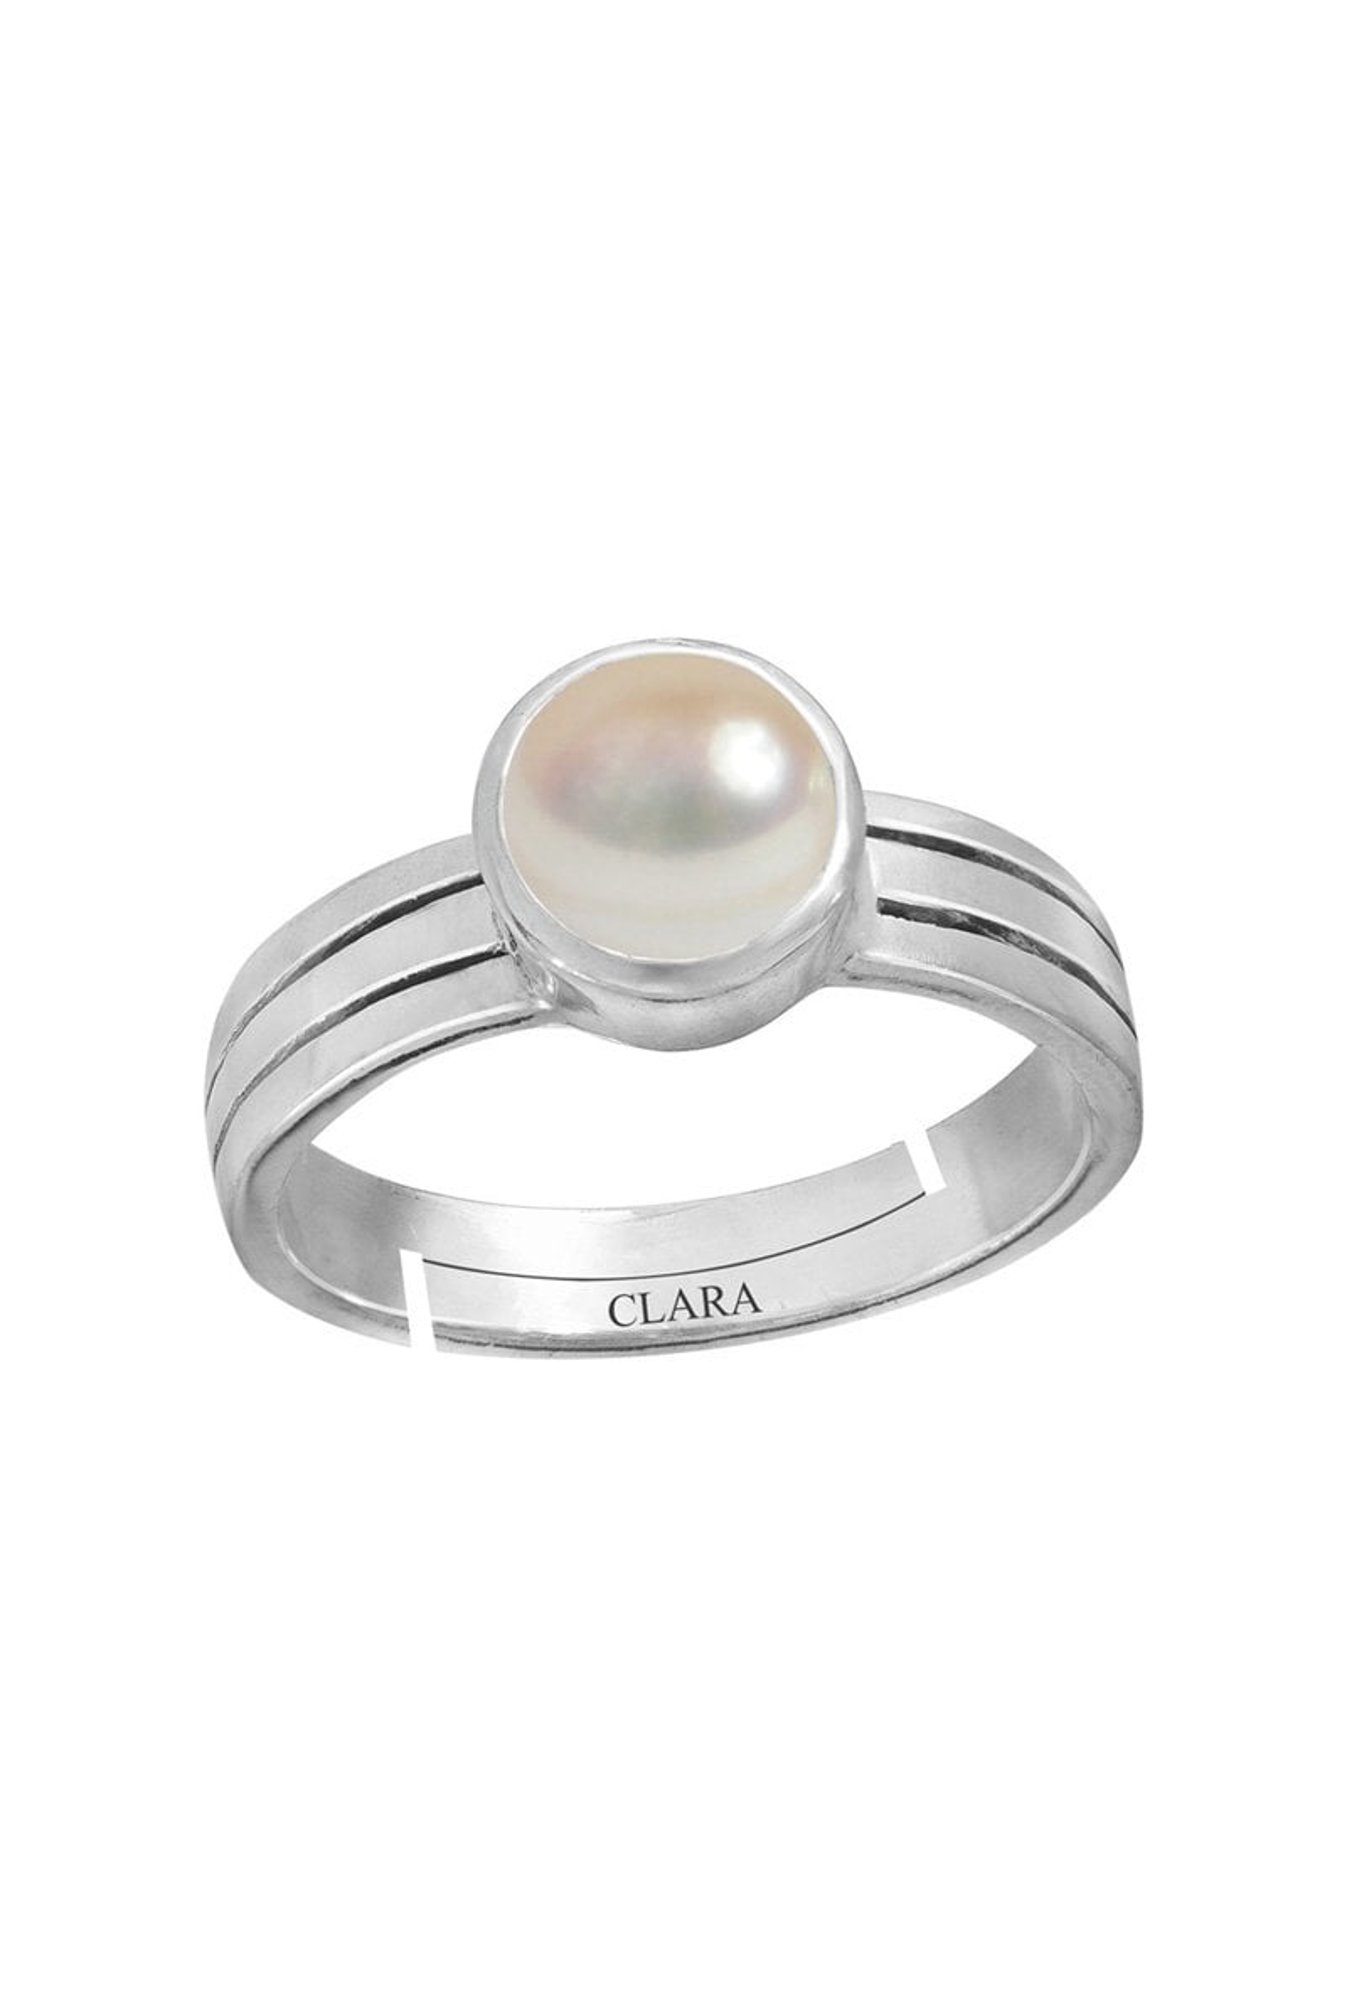 Buy Dainty Pearl Men's Ring, Round Shape Pearl Silver Ring, Synthetic Pearl  Men Ring, Mid Finger Silver Ring, Gift for Boyfriend, Rings for Him Online  in India - Etsy